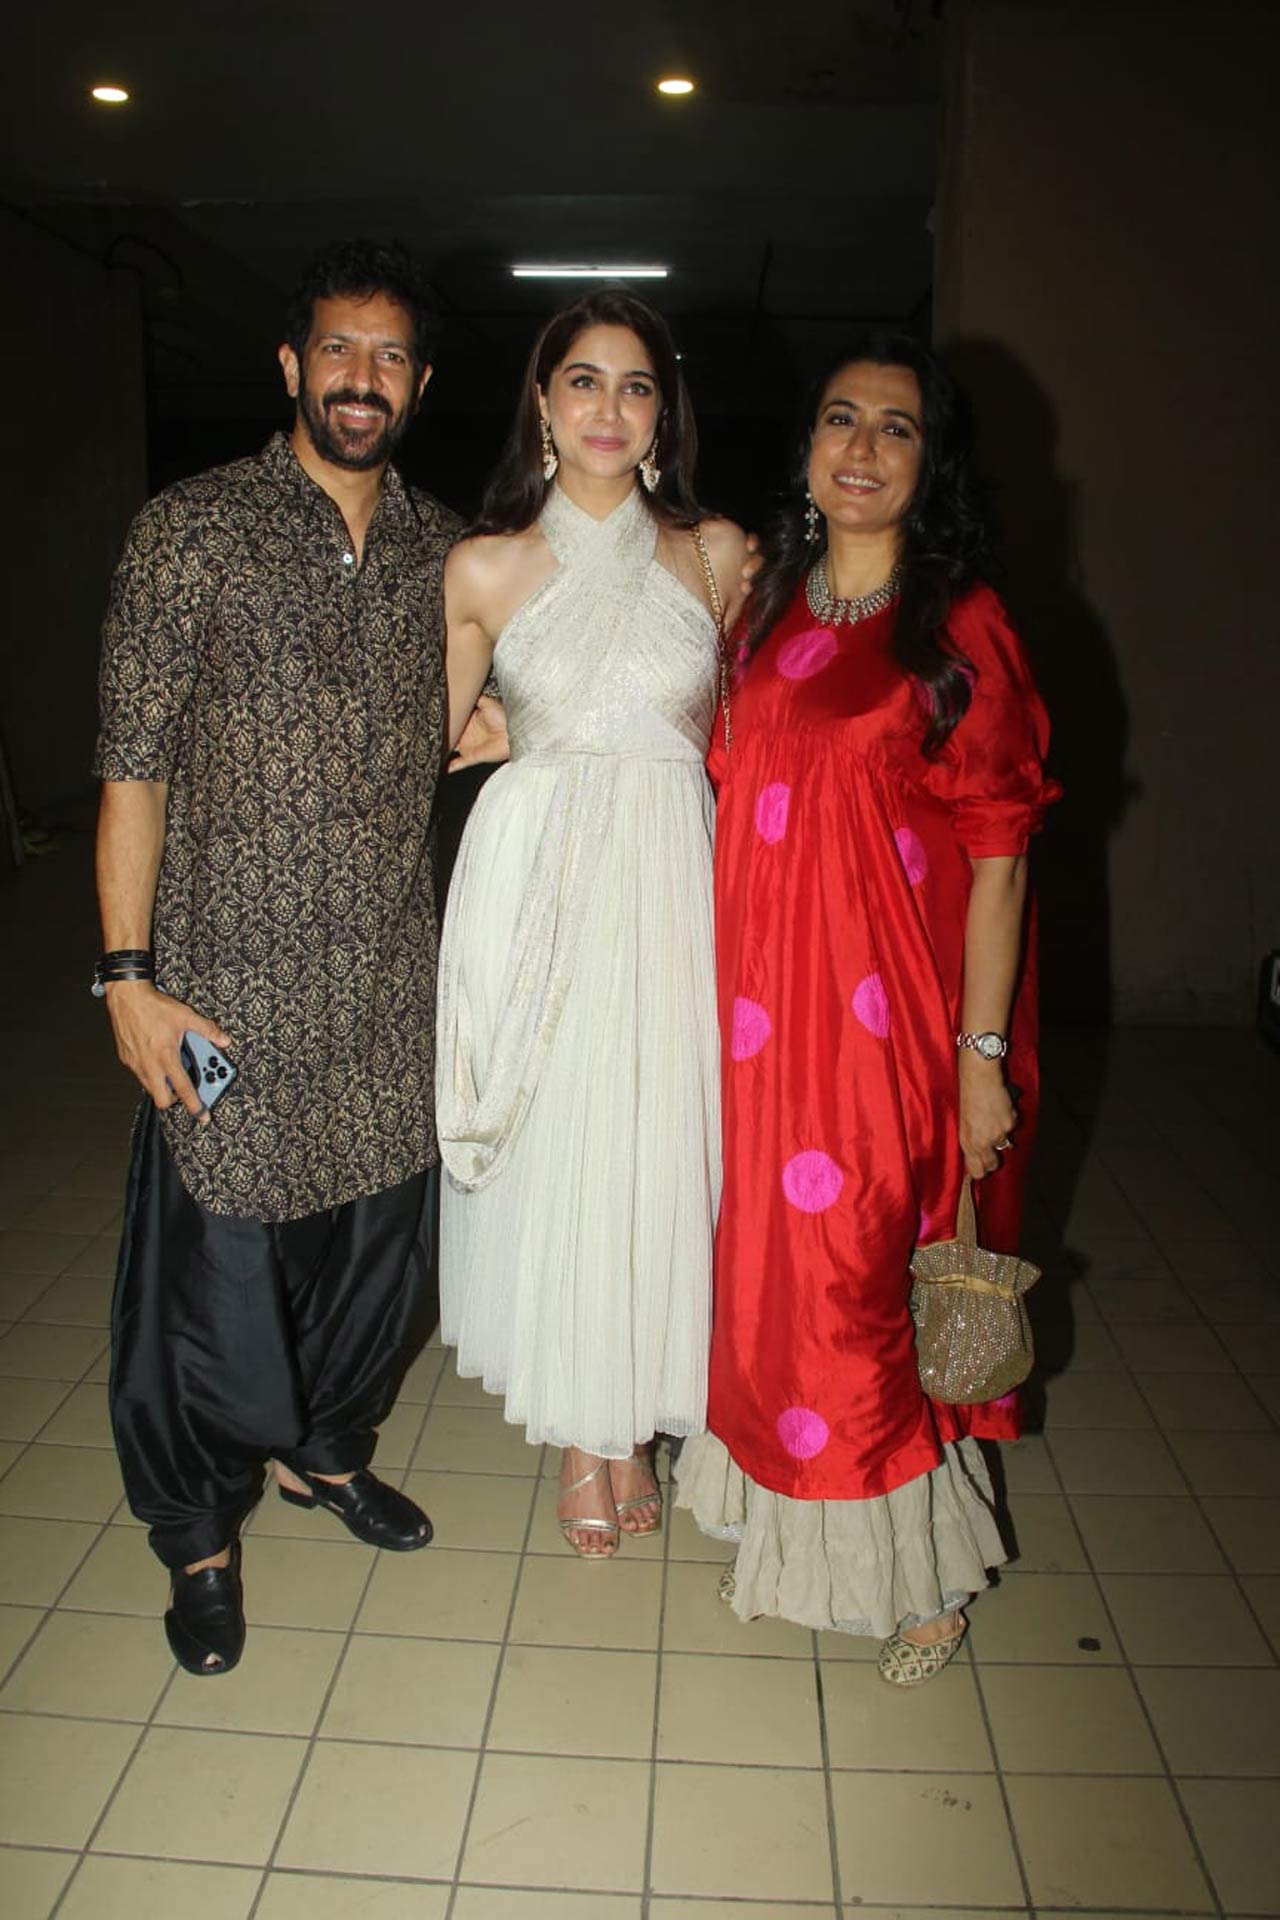 Bunty Aur Babli 2 fame Sharvari Wagh was a vision in white as she attended the party in a classy outfit. The actress posed with director Kabir Khan and his wife Mini Mathur, a well-known TV host and VJ.